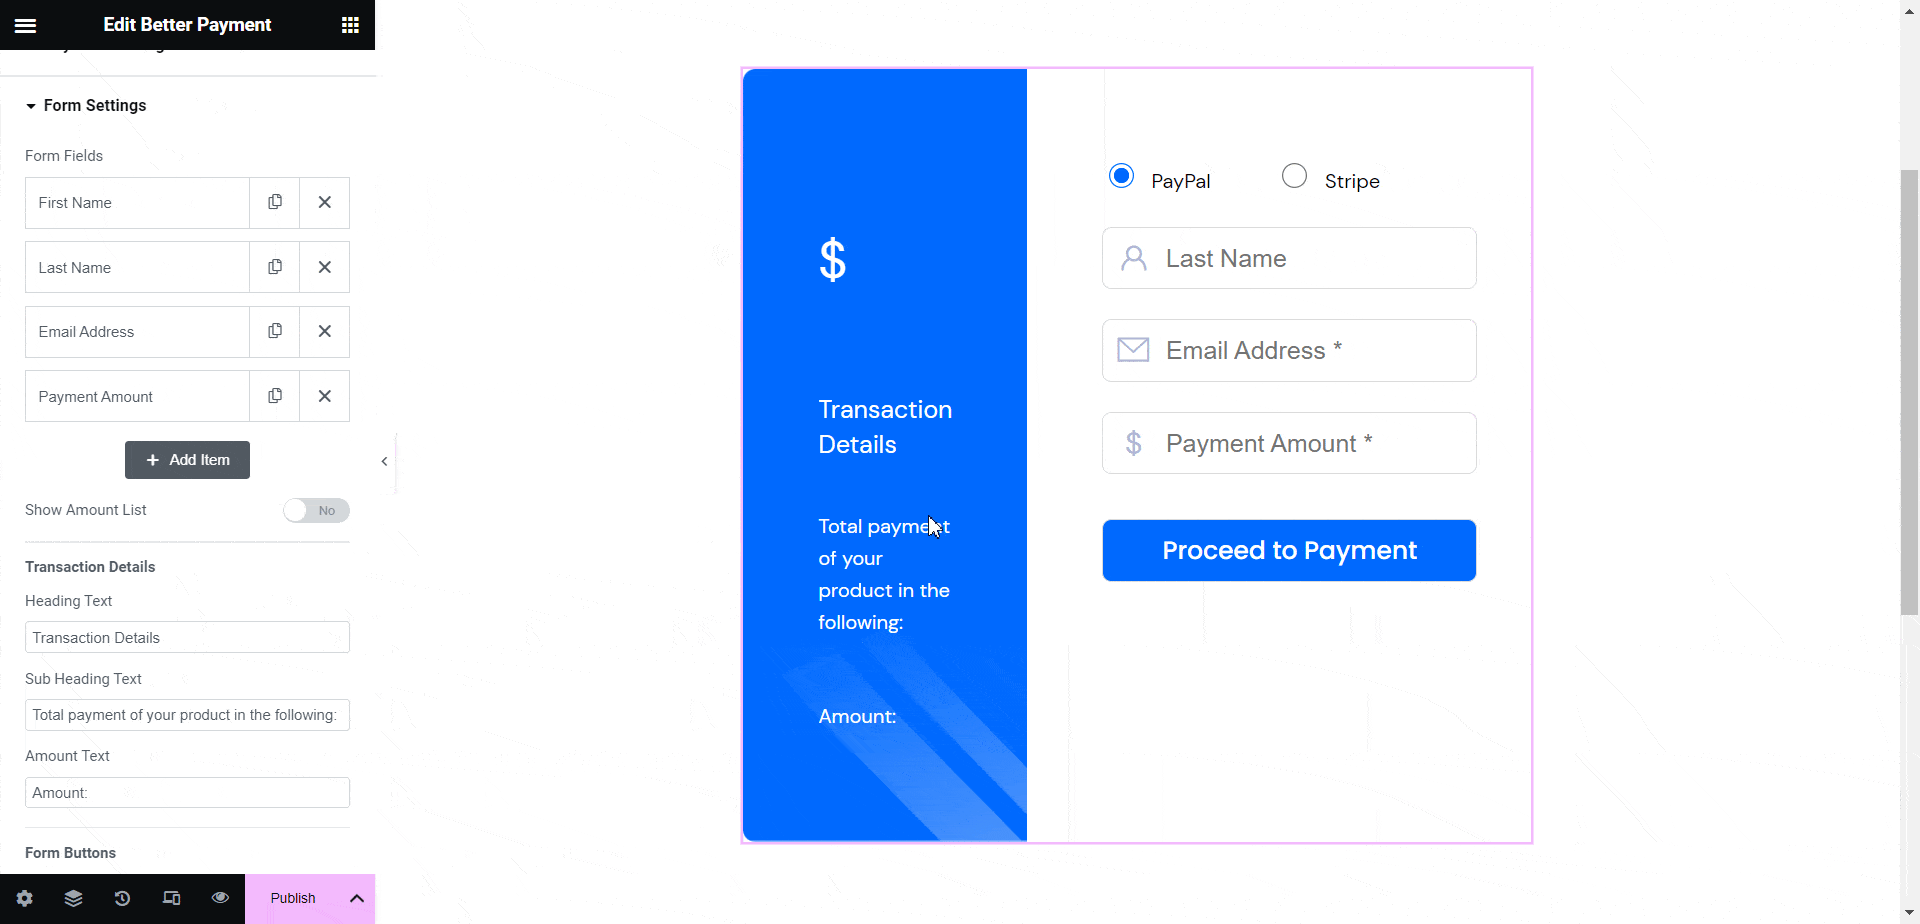 Configure Form Settings In Better Payment